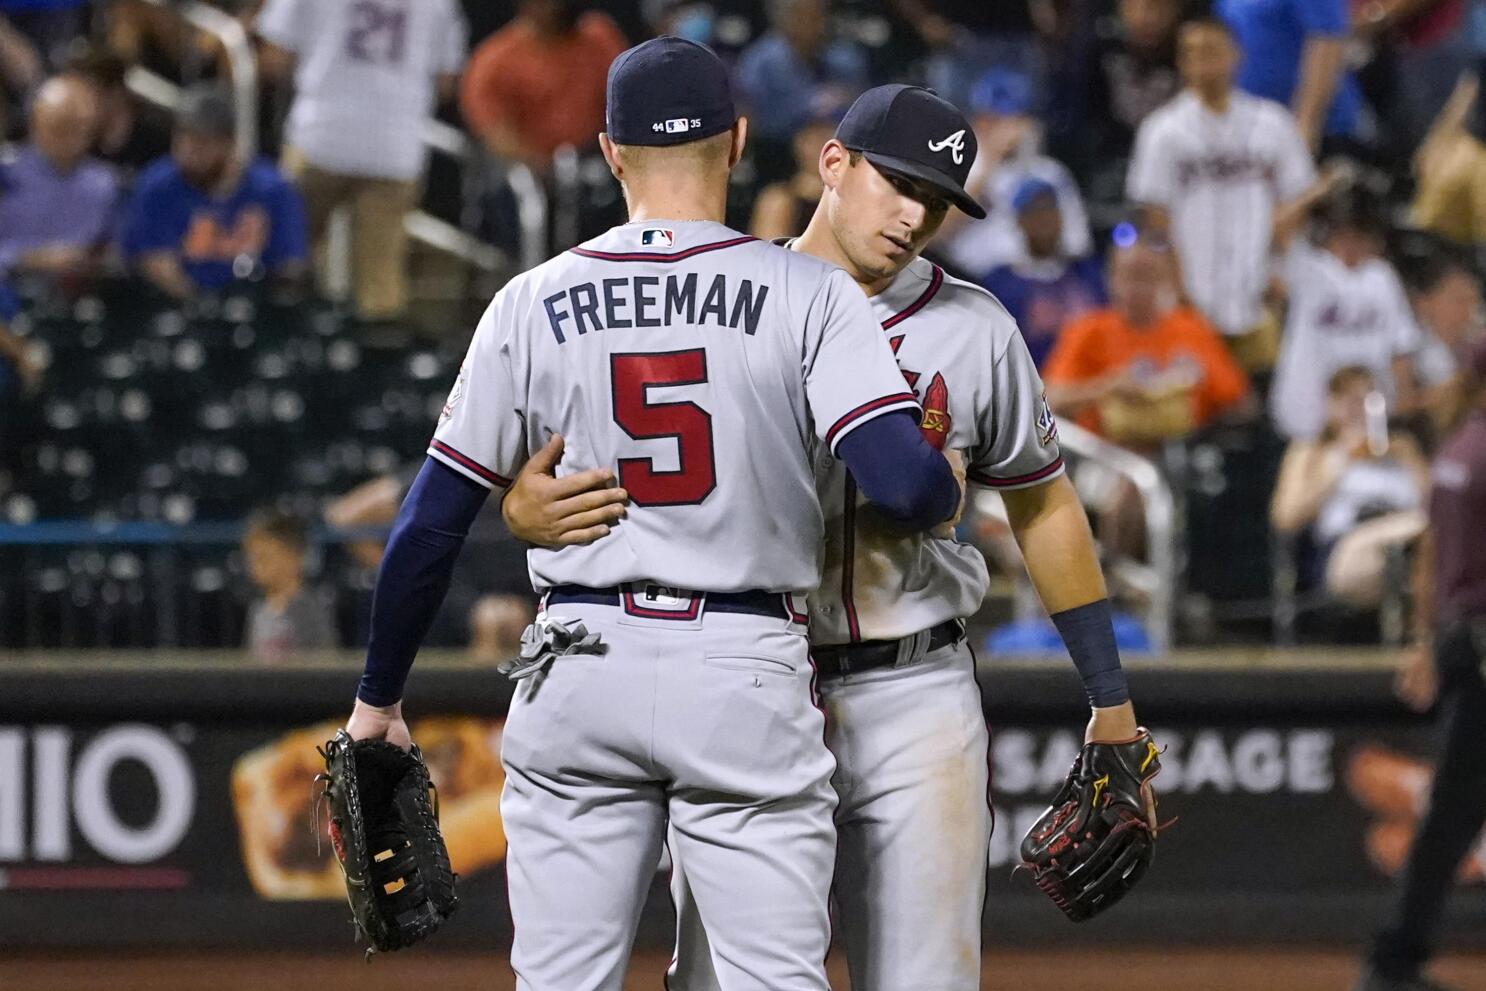 Freddie Freeman's RBI in 10th gives Braves 1-0 win vs. Reds